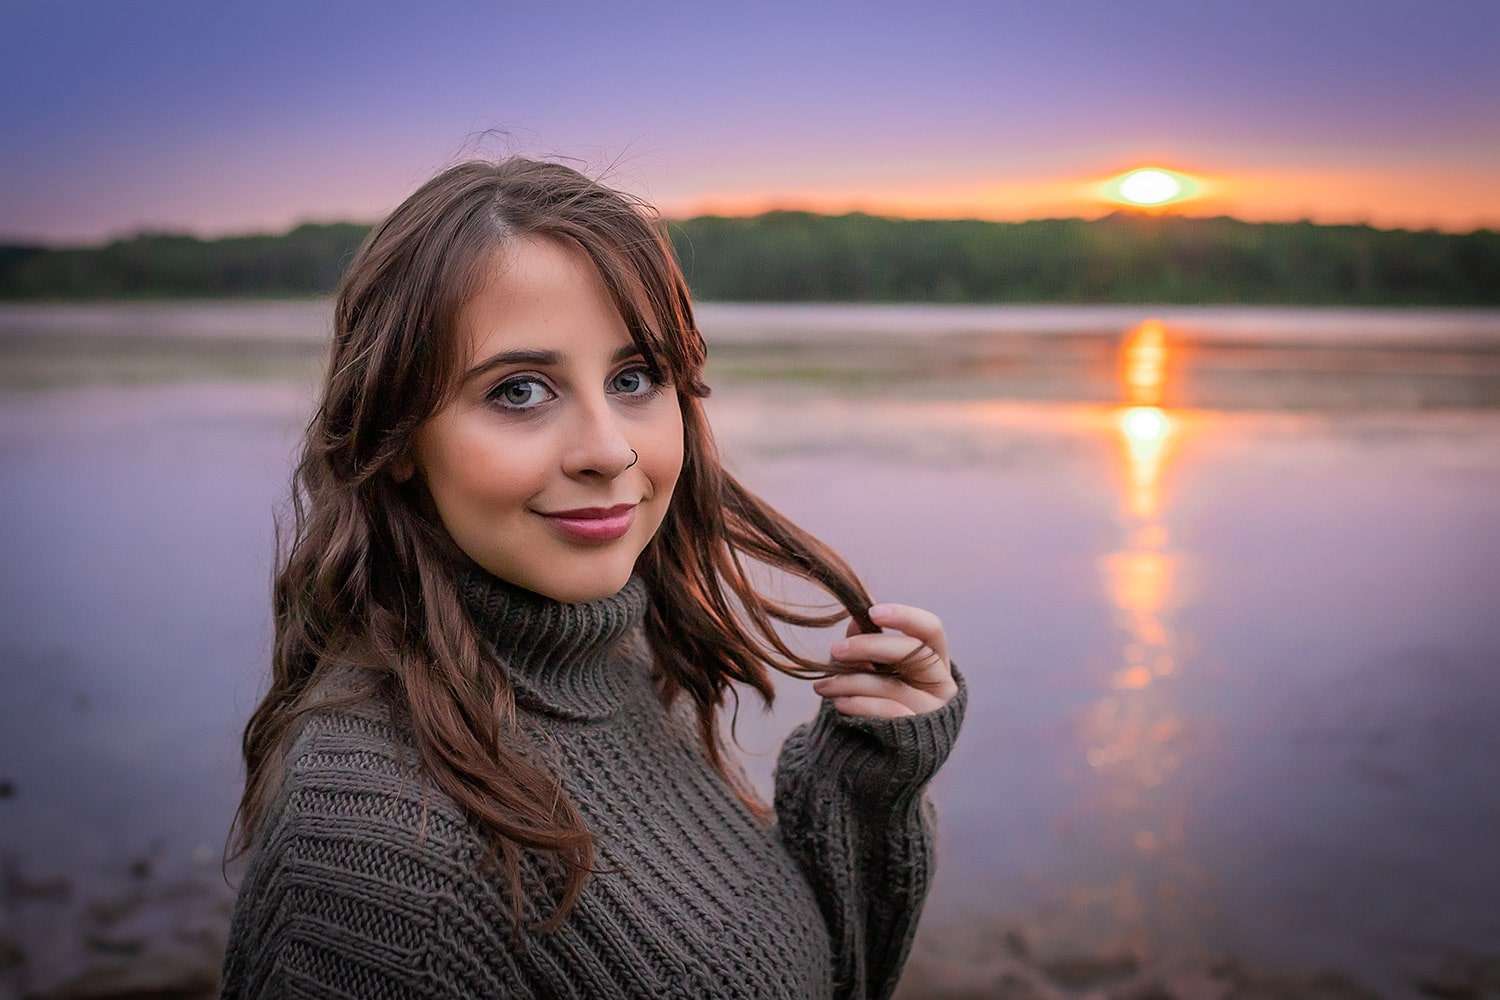 family photographer in rochester ny captures senior portraits on the water at sunset